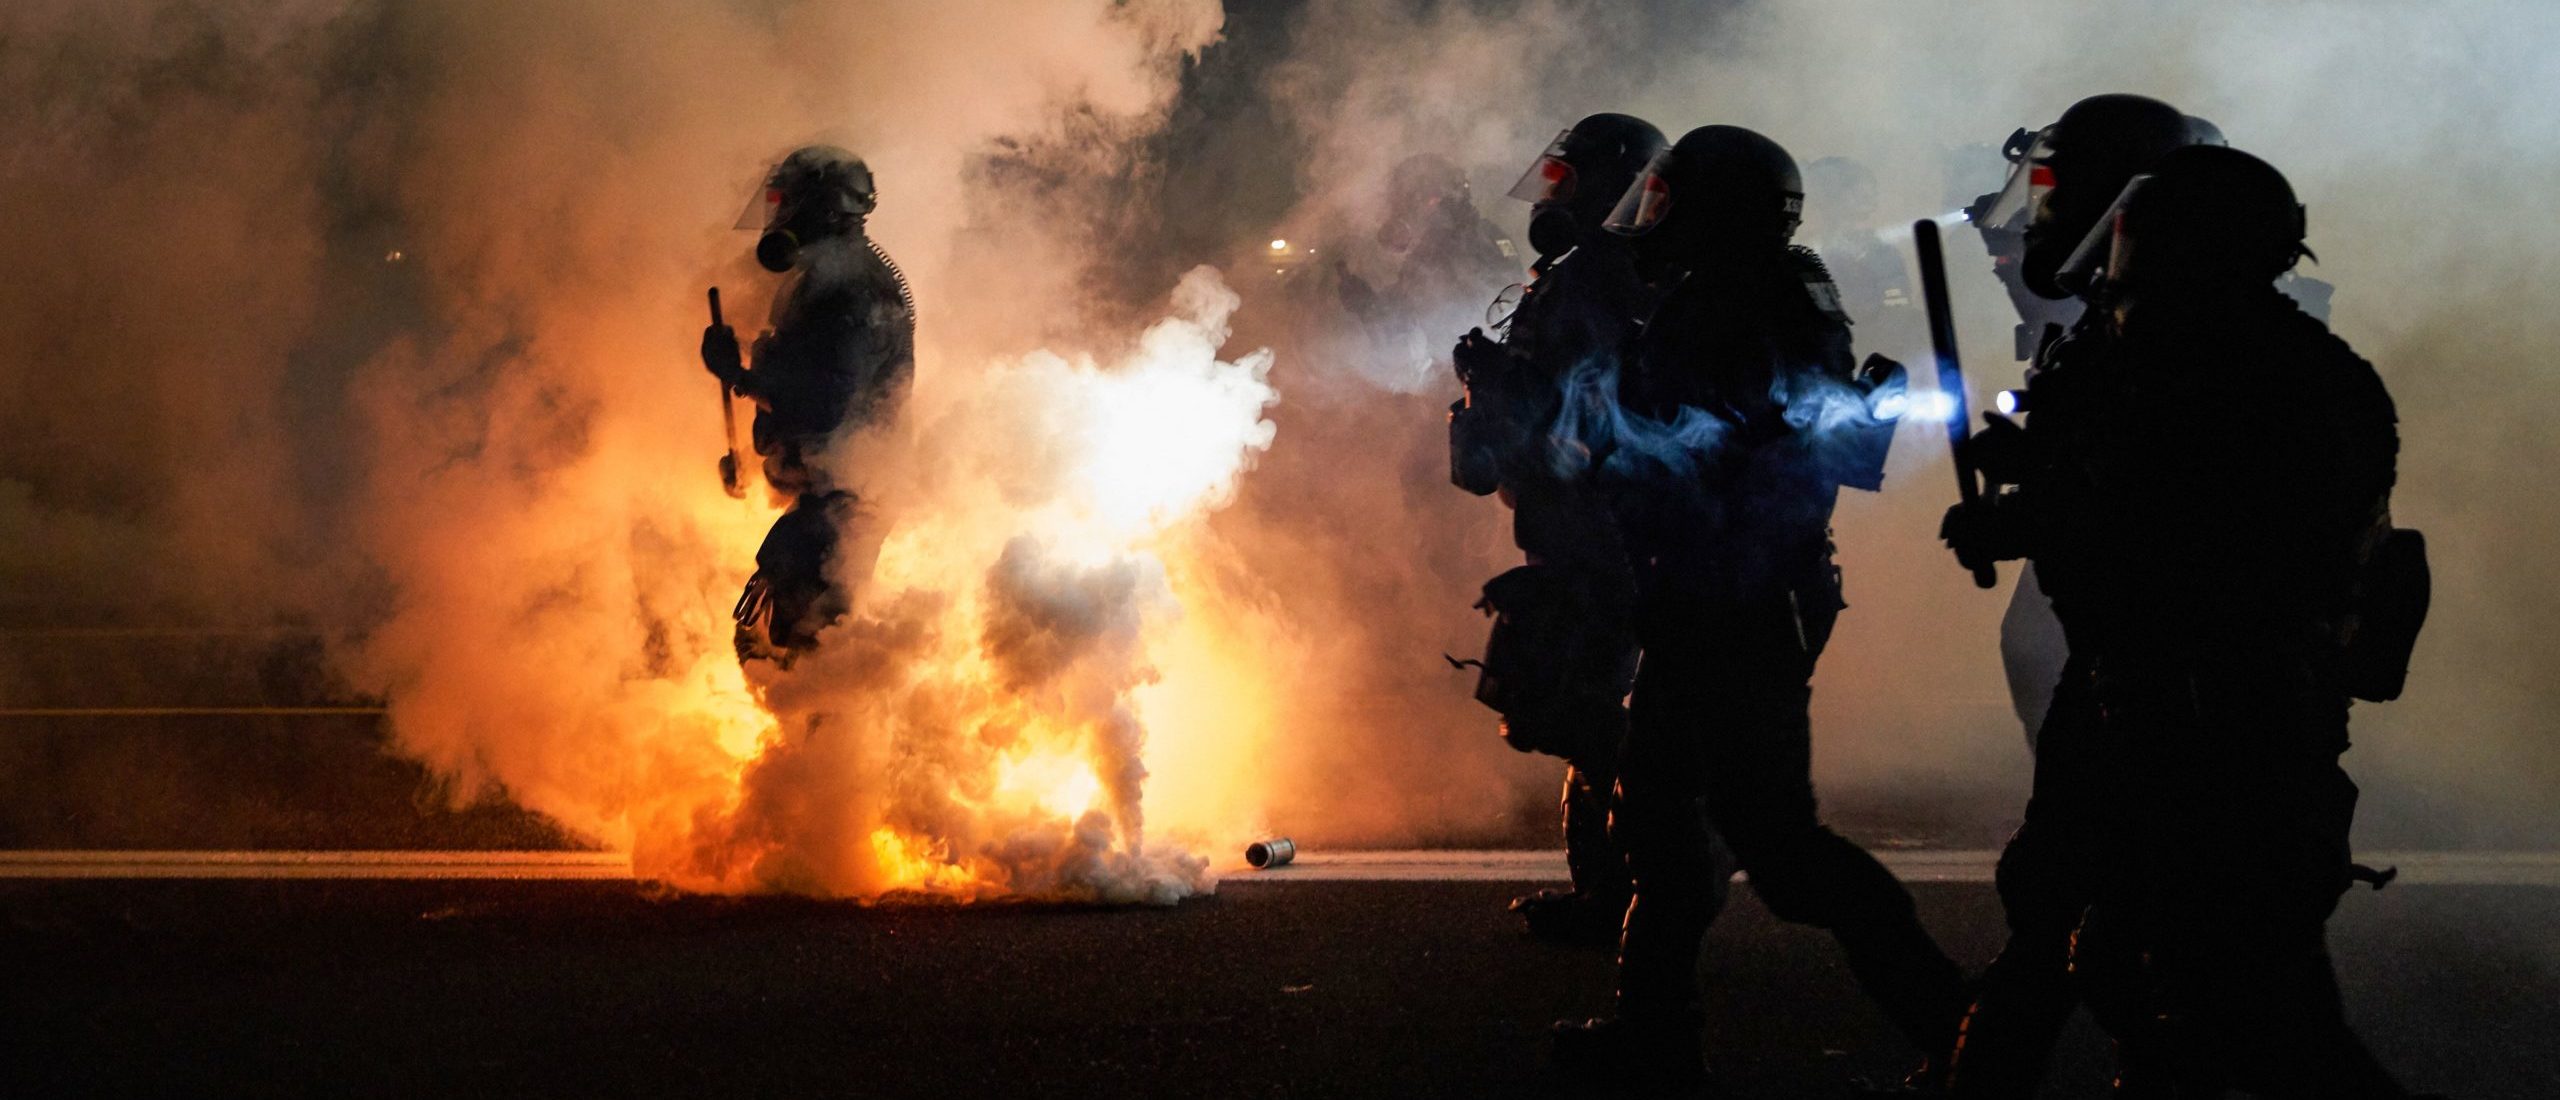 TOPSHOT - Oregon Police wearing anti-riot gear march towards protesters through tear gas smoke during the 100th day and night of protests against racism and police brutality in Portland, Oregon, on September 5, 2020. - Police arrested dozens of people and used tear gas against hundreds of demonstrators in Portland late on September 5 as the western US city marked 100 days since Black Lives Matter protests erupted against racism and police brutality. Protests in major US cities erupted after the death of African American George Floyd in May 2020 at the hands of a white police officer in Minneapolis. (Photo by Allison Dinner / AFP) (Photo by ALLISON DINNER/AFP via Getty Images)